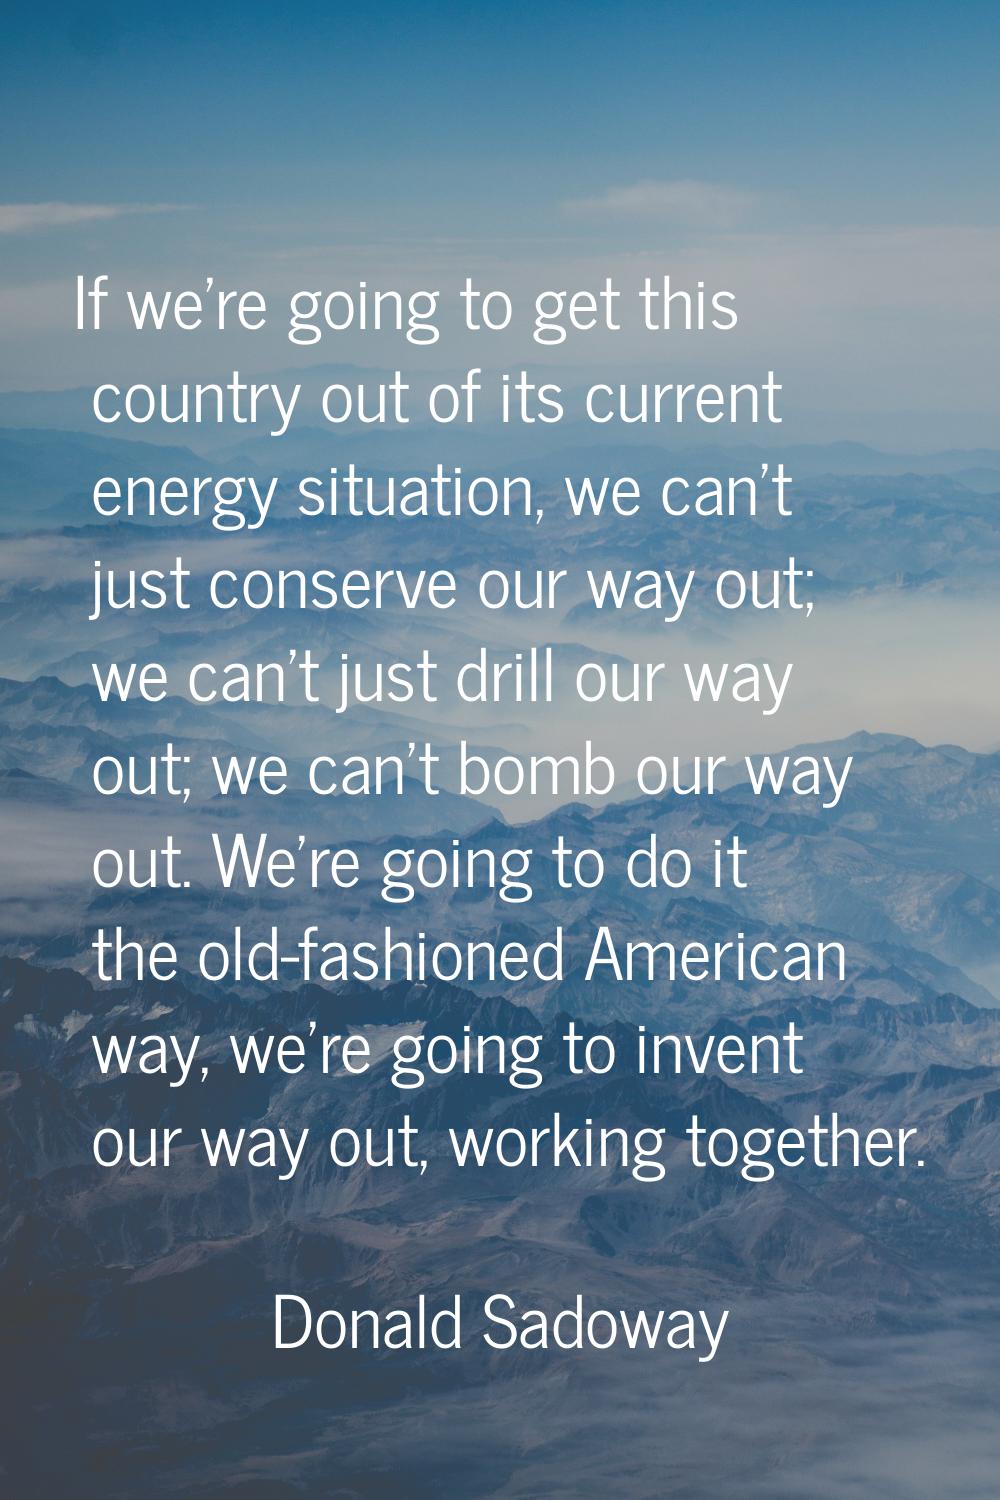 If we're going to get this country out of its current energy situation, we can't just conserve our 